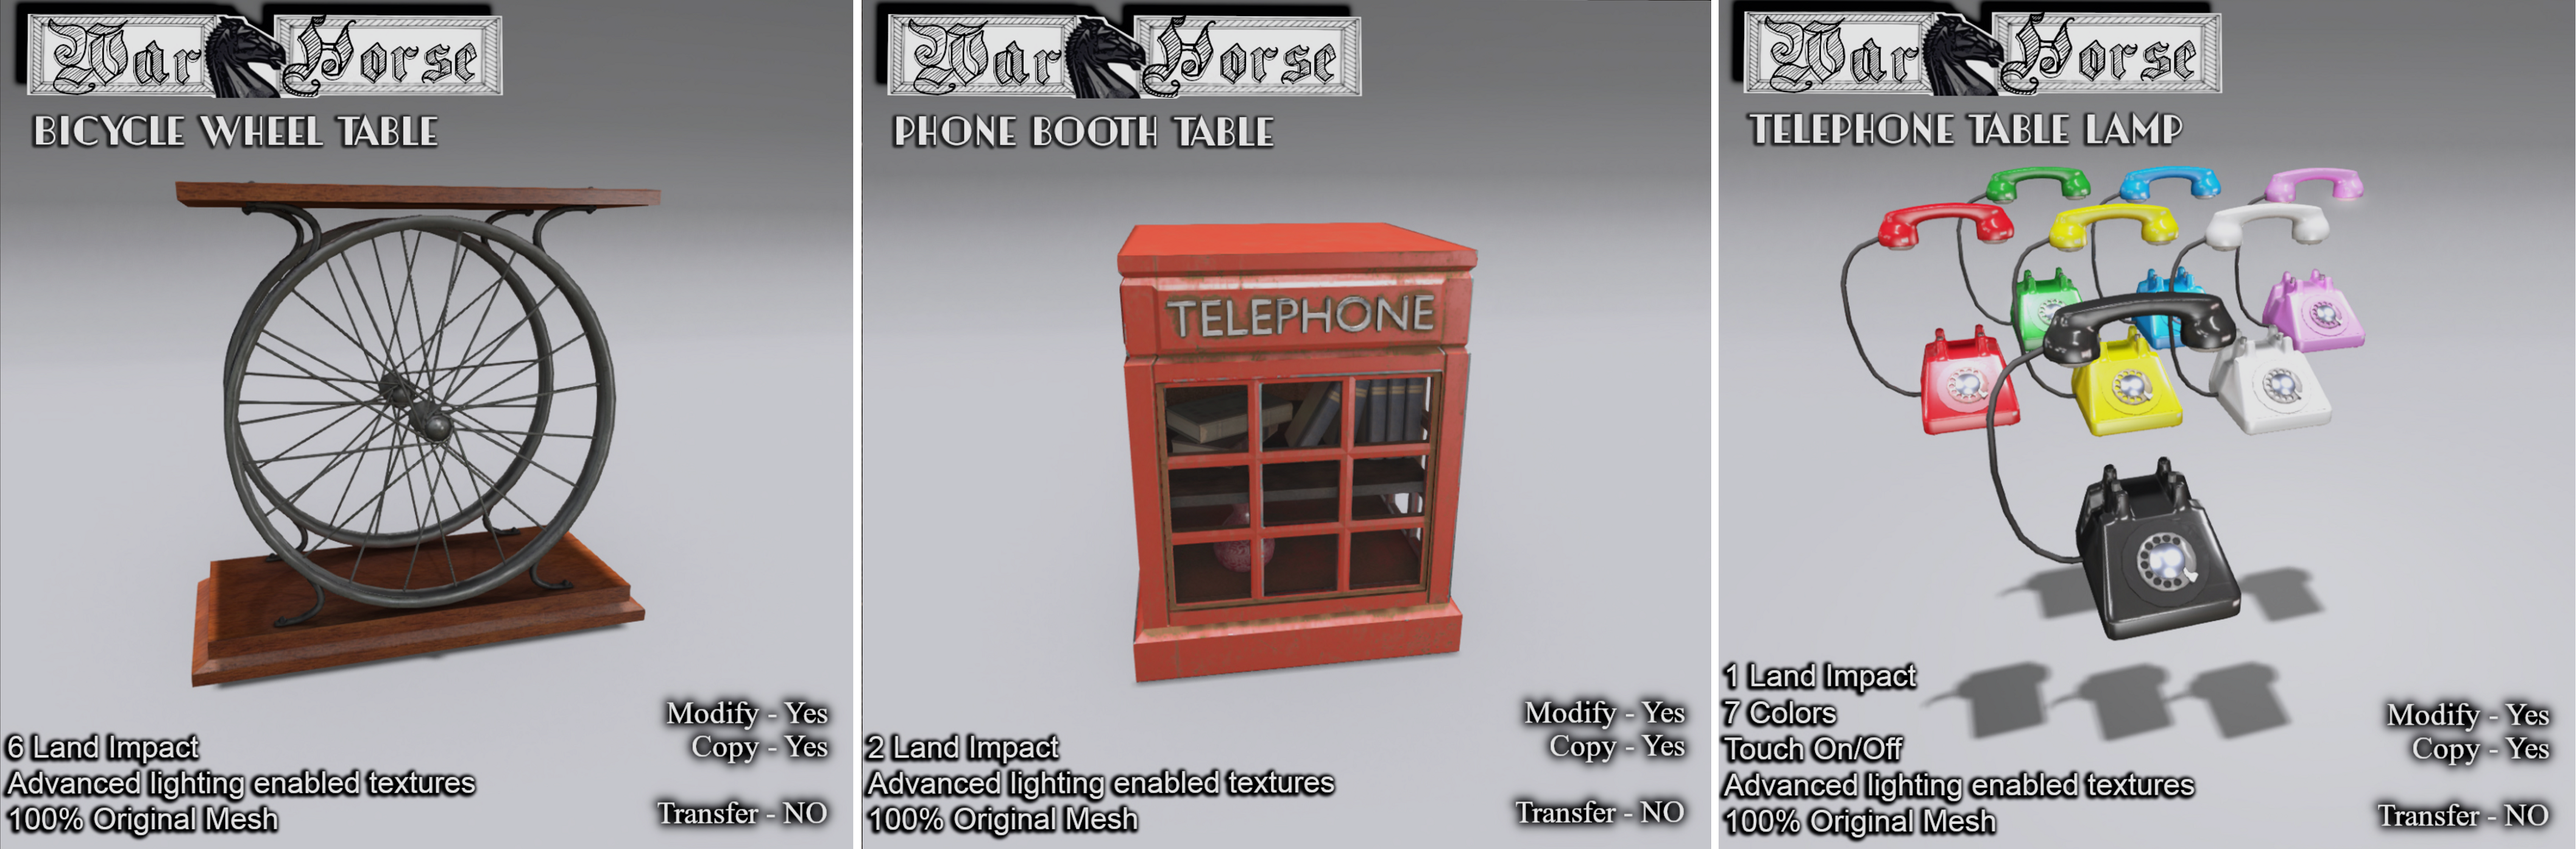 Warhorse – Bicycle Wheel Table, Phone Booth Table, & Telephone Table Lamp